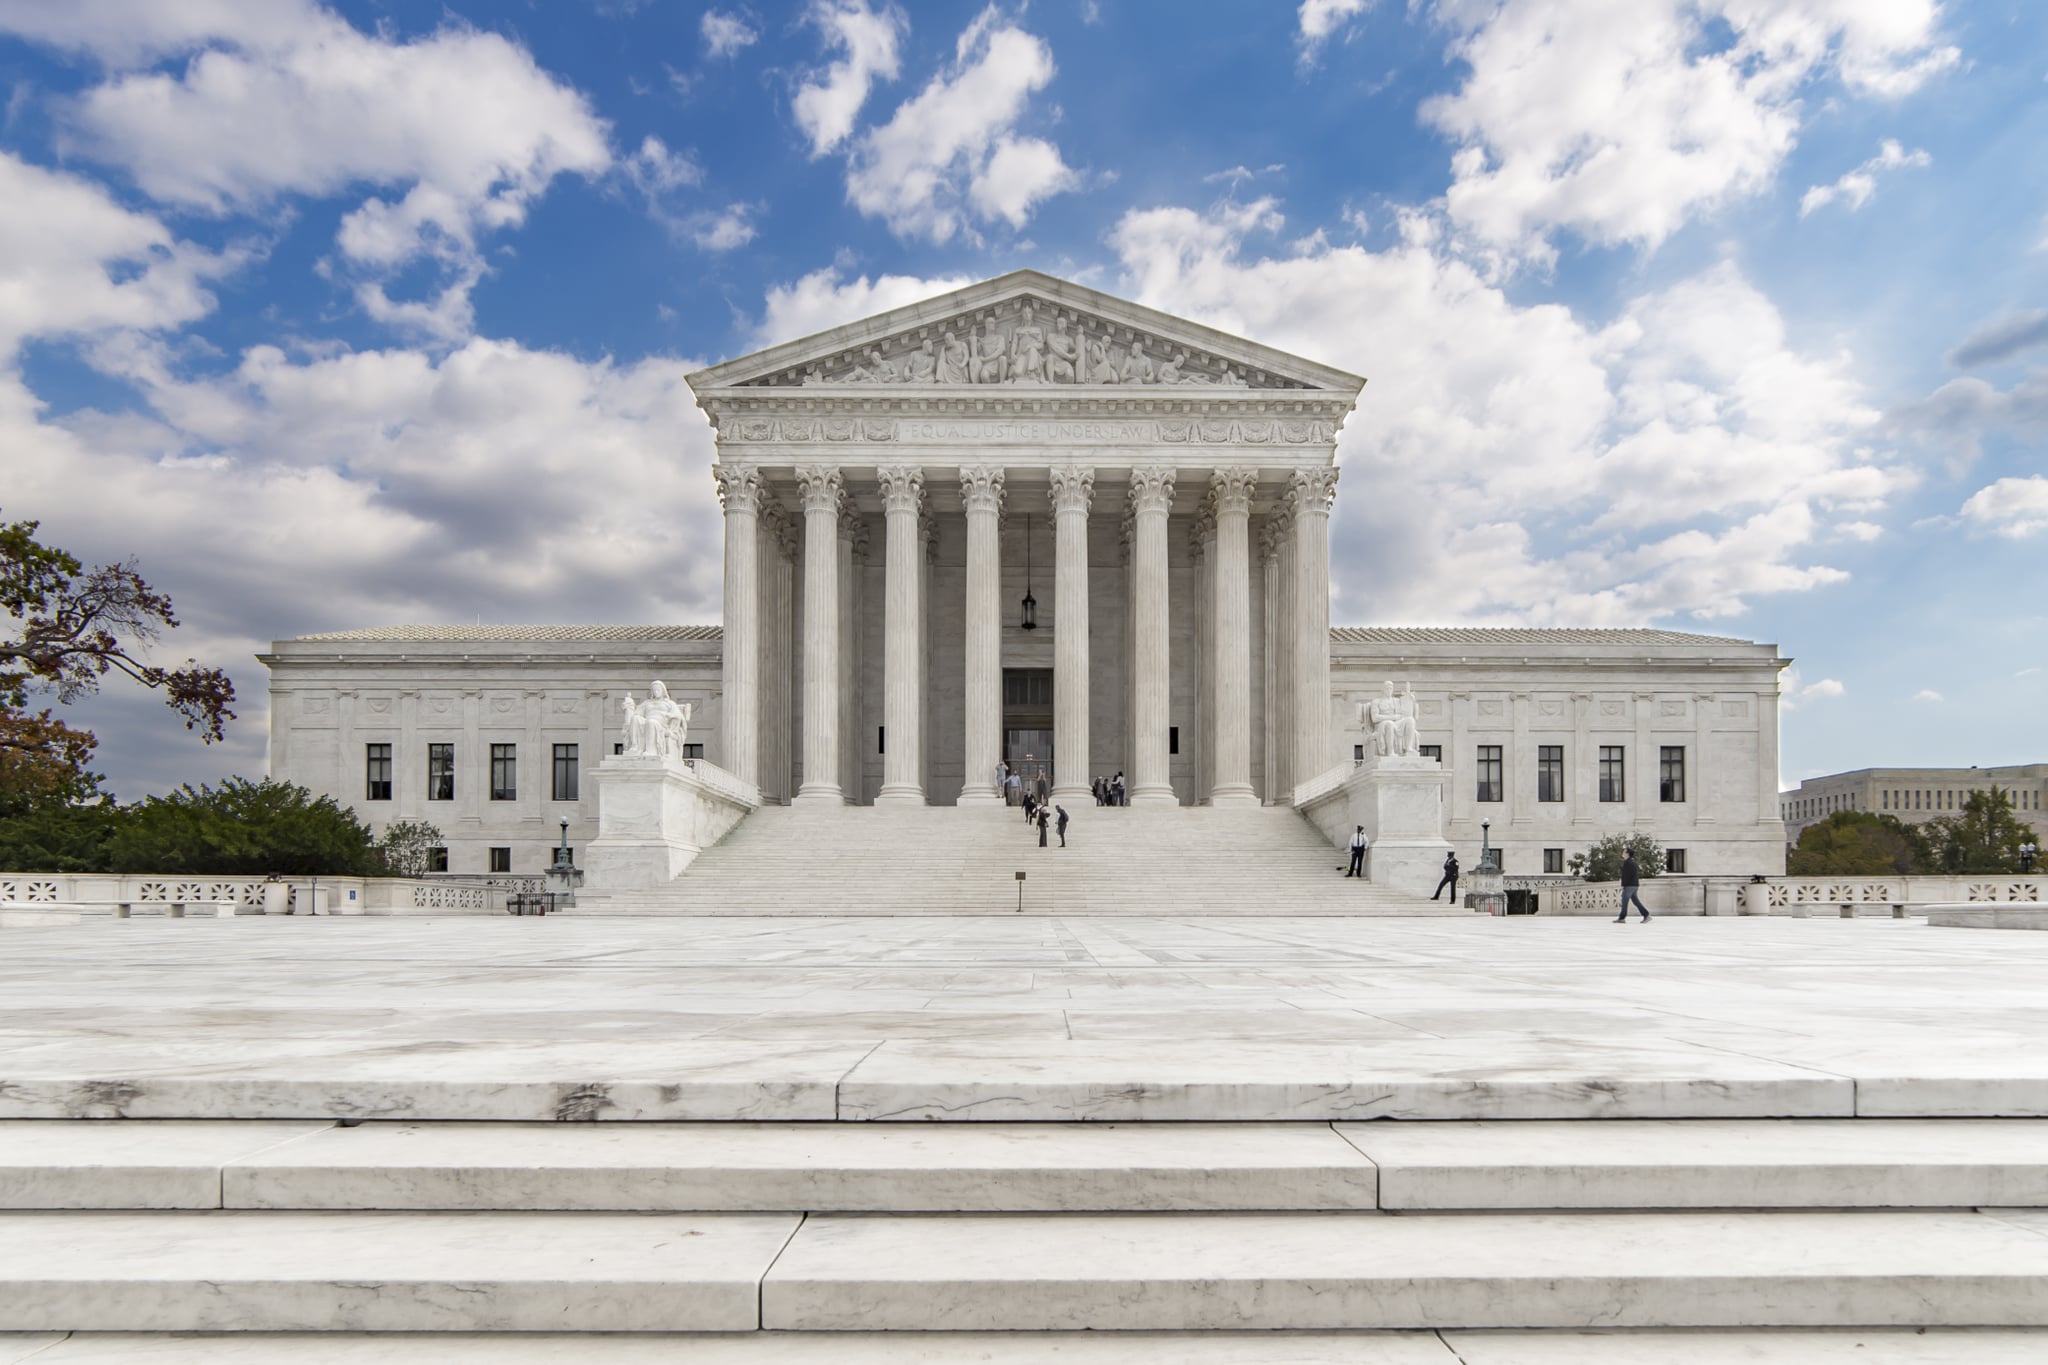 Taken at a moment when only a handful of people were in the scene, this straight-on image of the US Supreme Court shows the majesty of the structure. Home to the most powerful lawmakers in the country, this iconic building is centered under a blue sky with some scattered clouds.